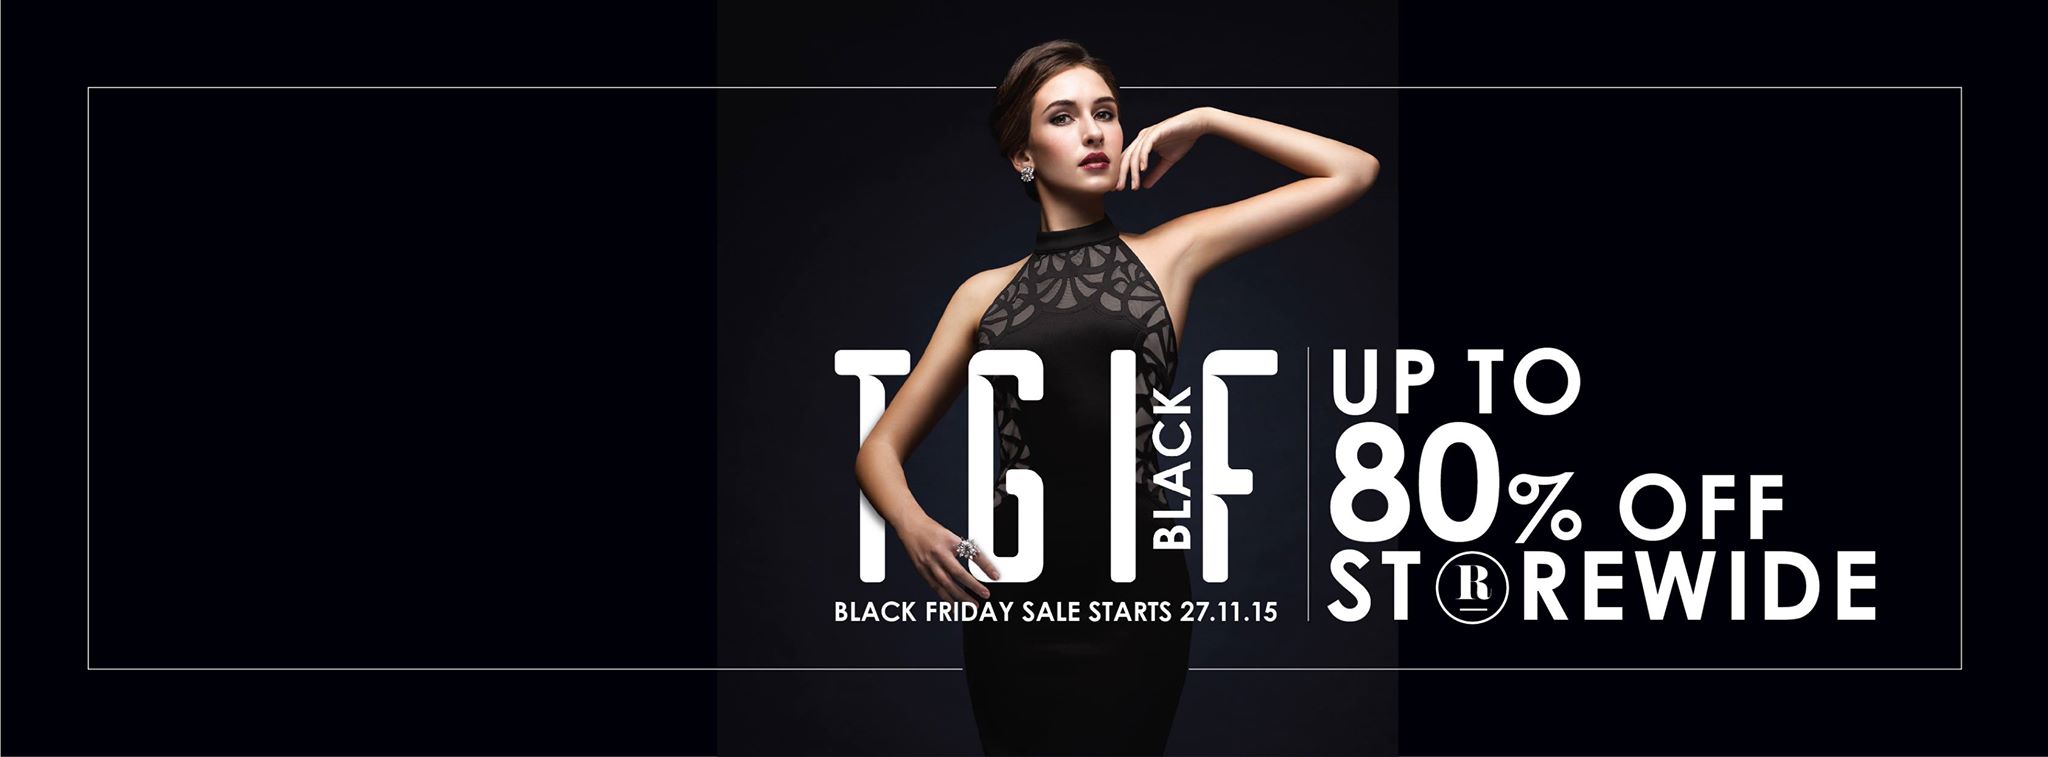 10 Black Friday Promotions Not To Be Missed In Singapore Today Mothership Sg News From Singapore Asia And Around The World